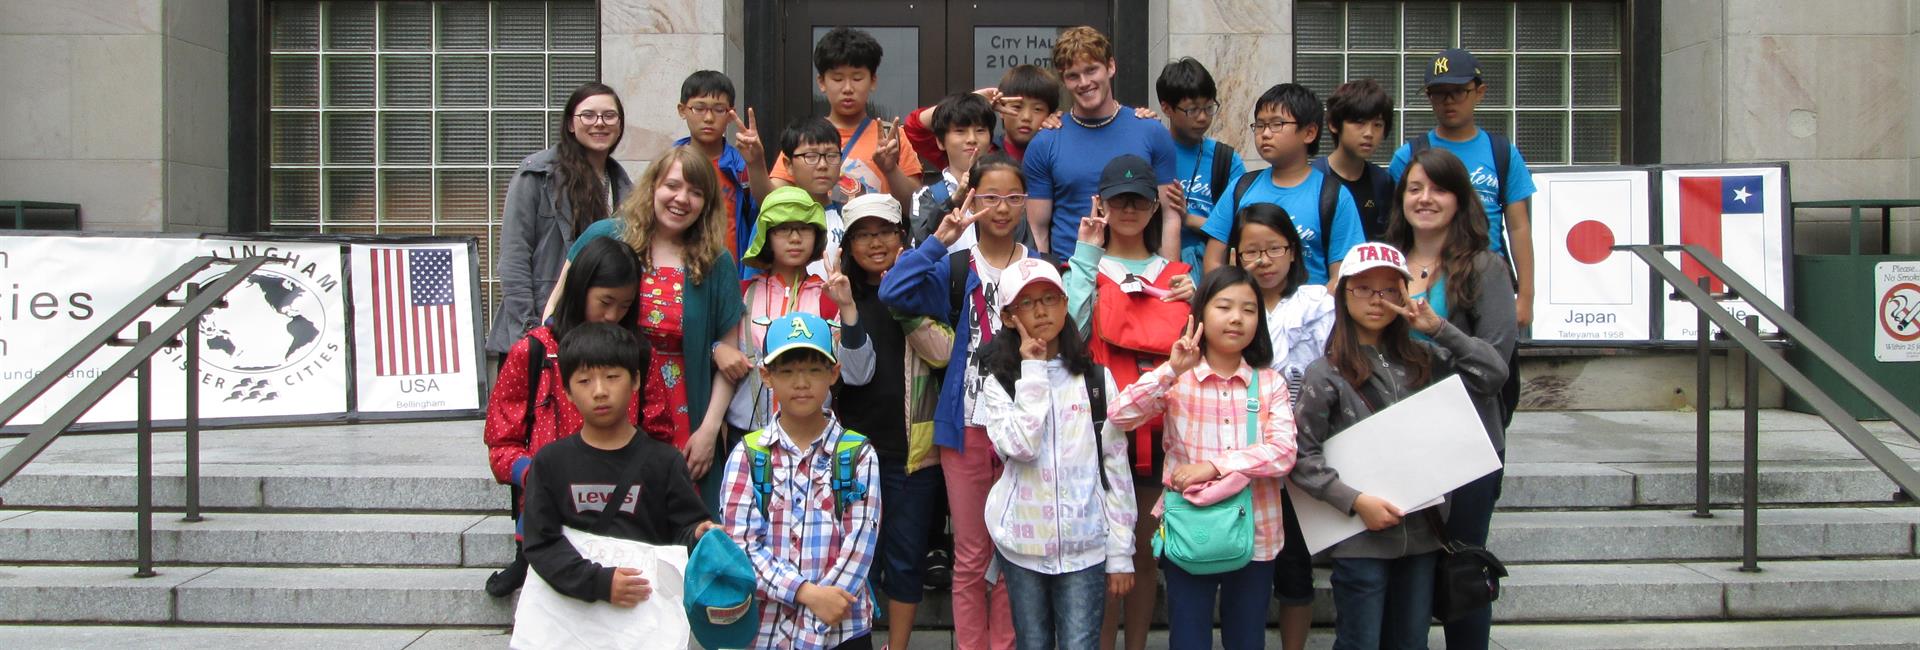 ​Visitors from Cheongju, South Korea, on the steps of City Hall<br> image